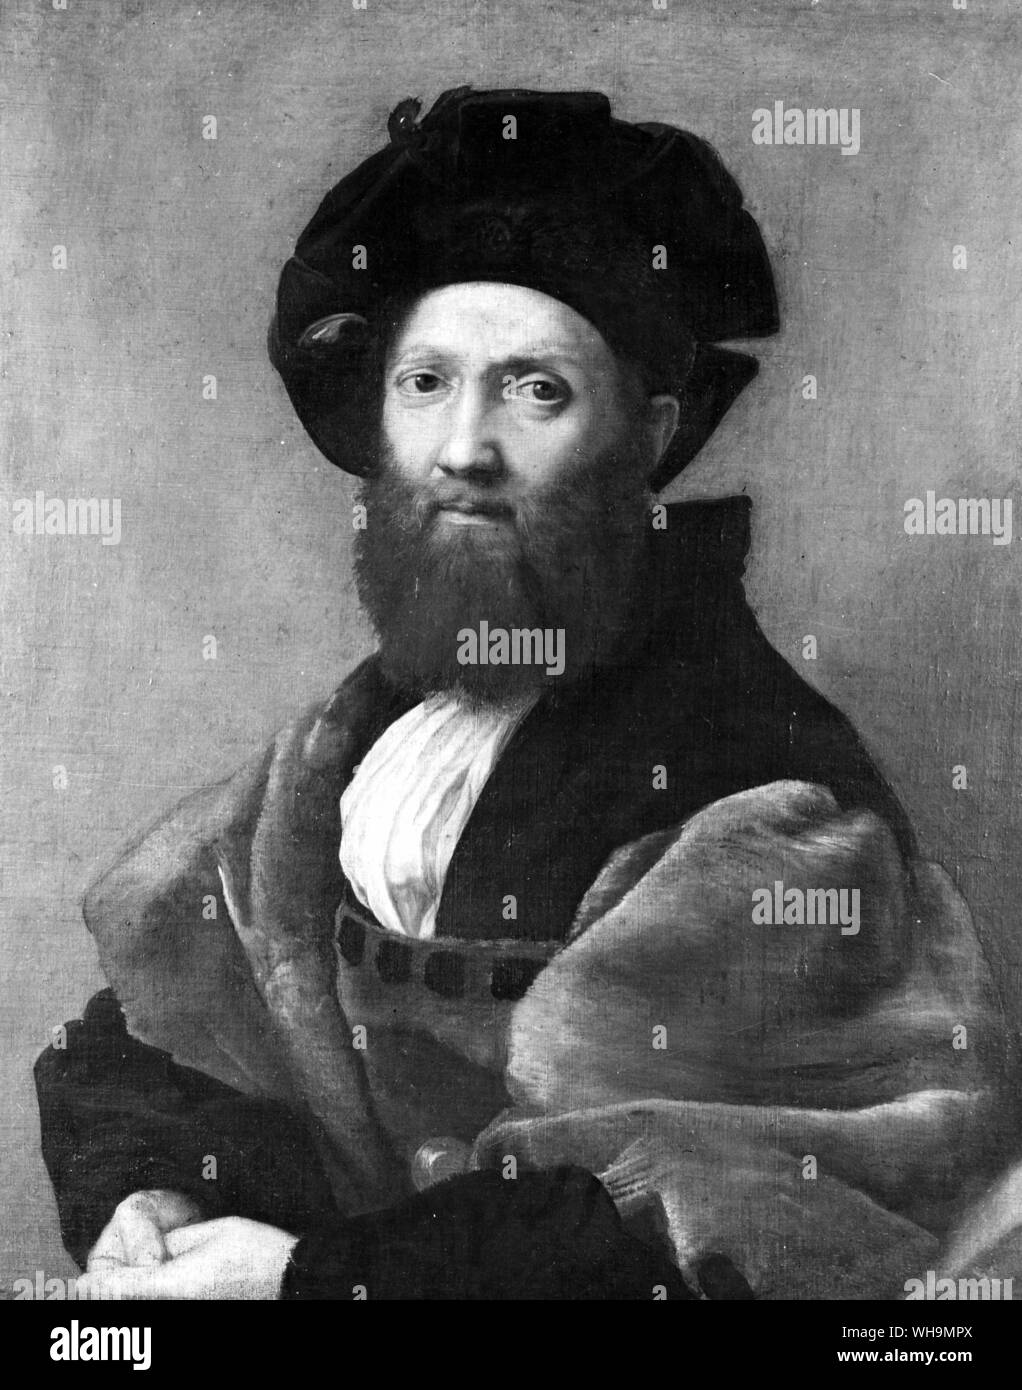 Count Baldassare (or Balthazar) Castiglione (1478-1529). Italian author and diplomat by Raphael. Stock Photo